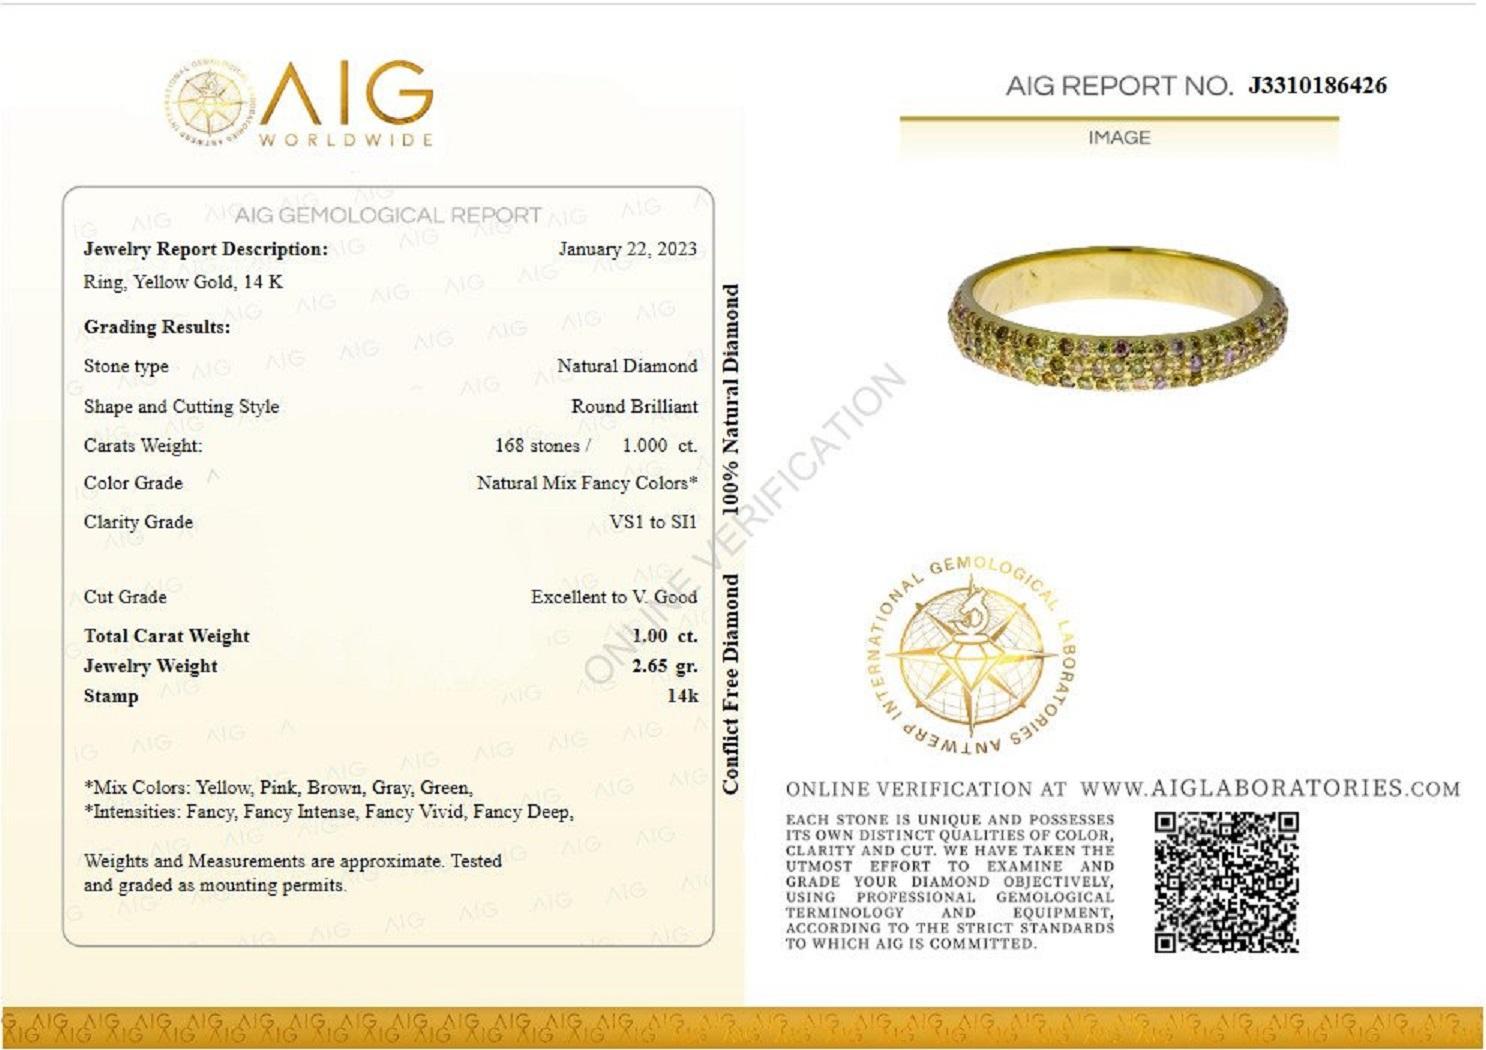 ** In Hong Kong and the USA the VAT is 0%.

Center Stone:
___________
Natural Diamond
Cut: Round Brilliant Cut
Carat: 1.00 cttw / 168 stones
Color: Natural Fancy Mix Colors
Clarity: VS1 to SI1

Item ships from Israeli Diamonds Exchange, customers